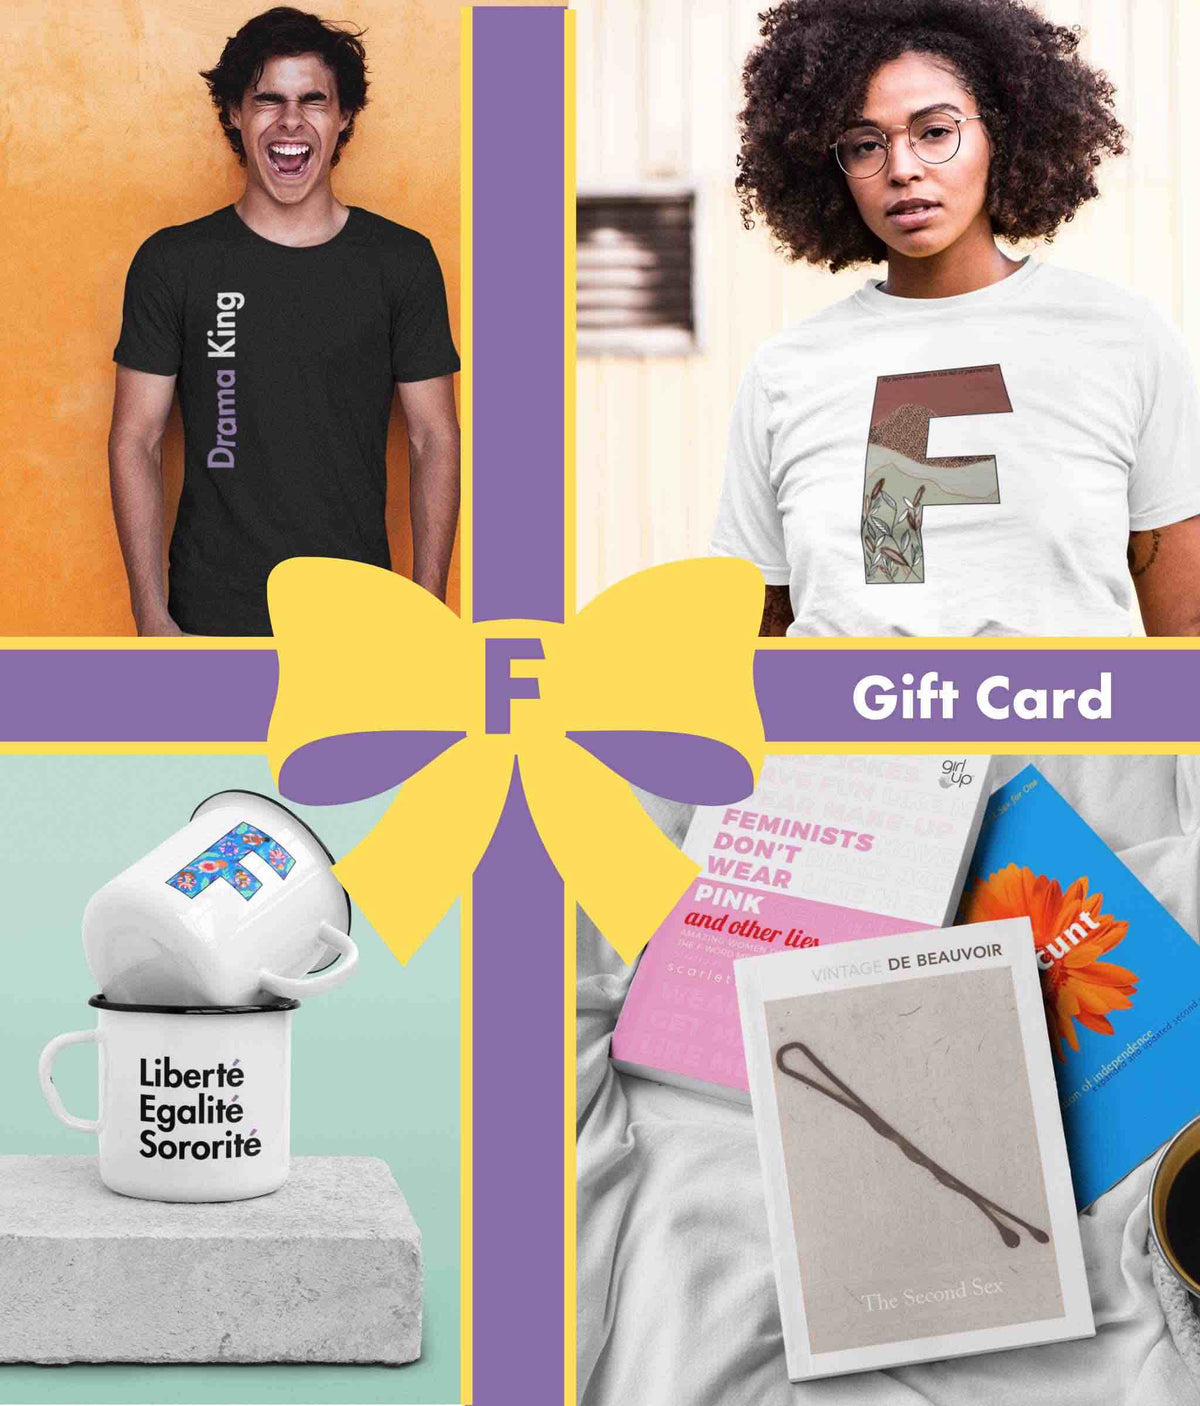 The Feminist Shop Gift Card + Pin Badge: